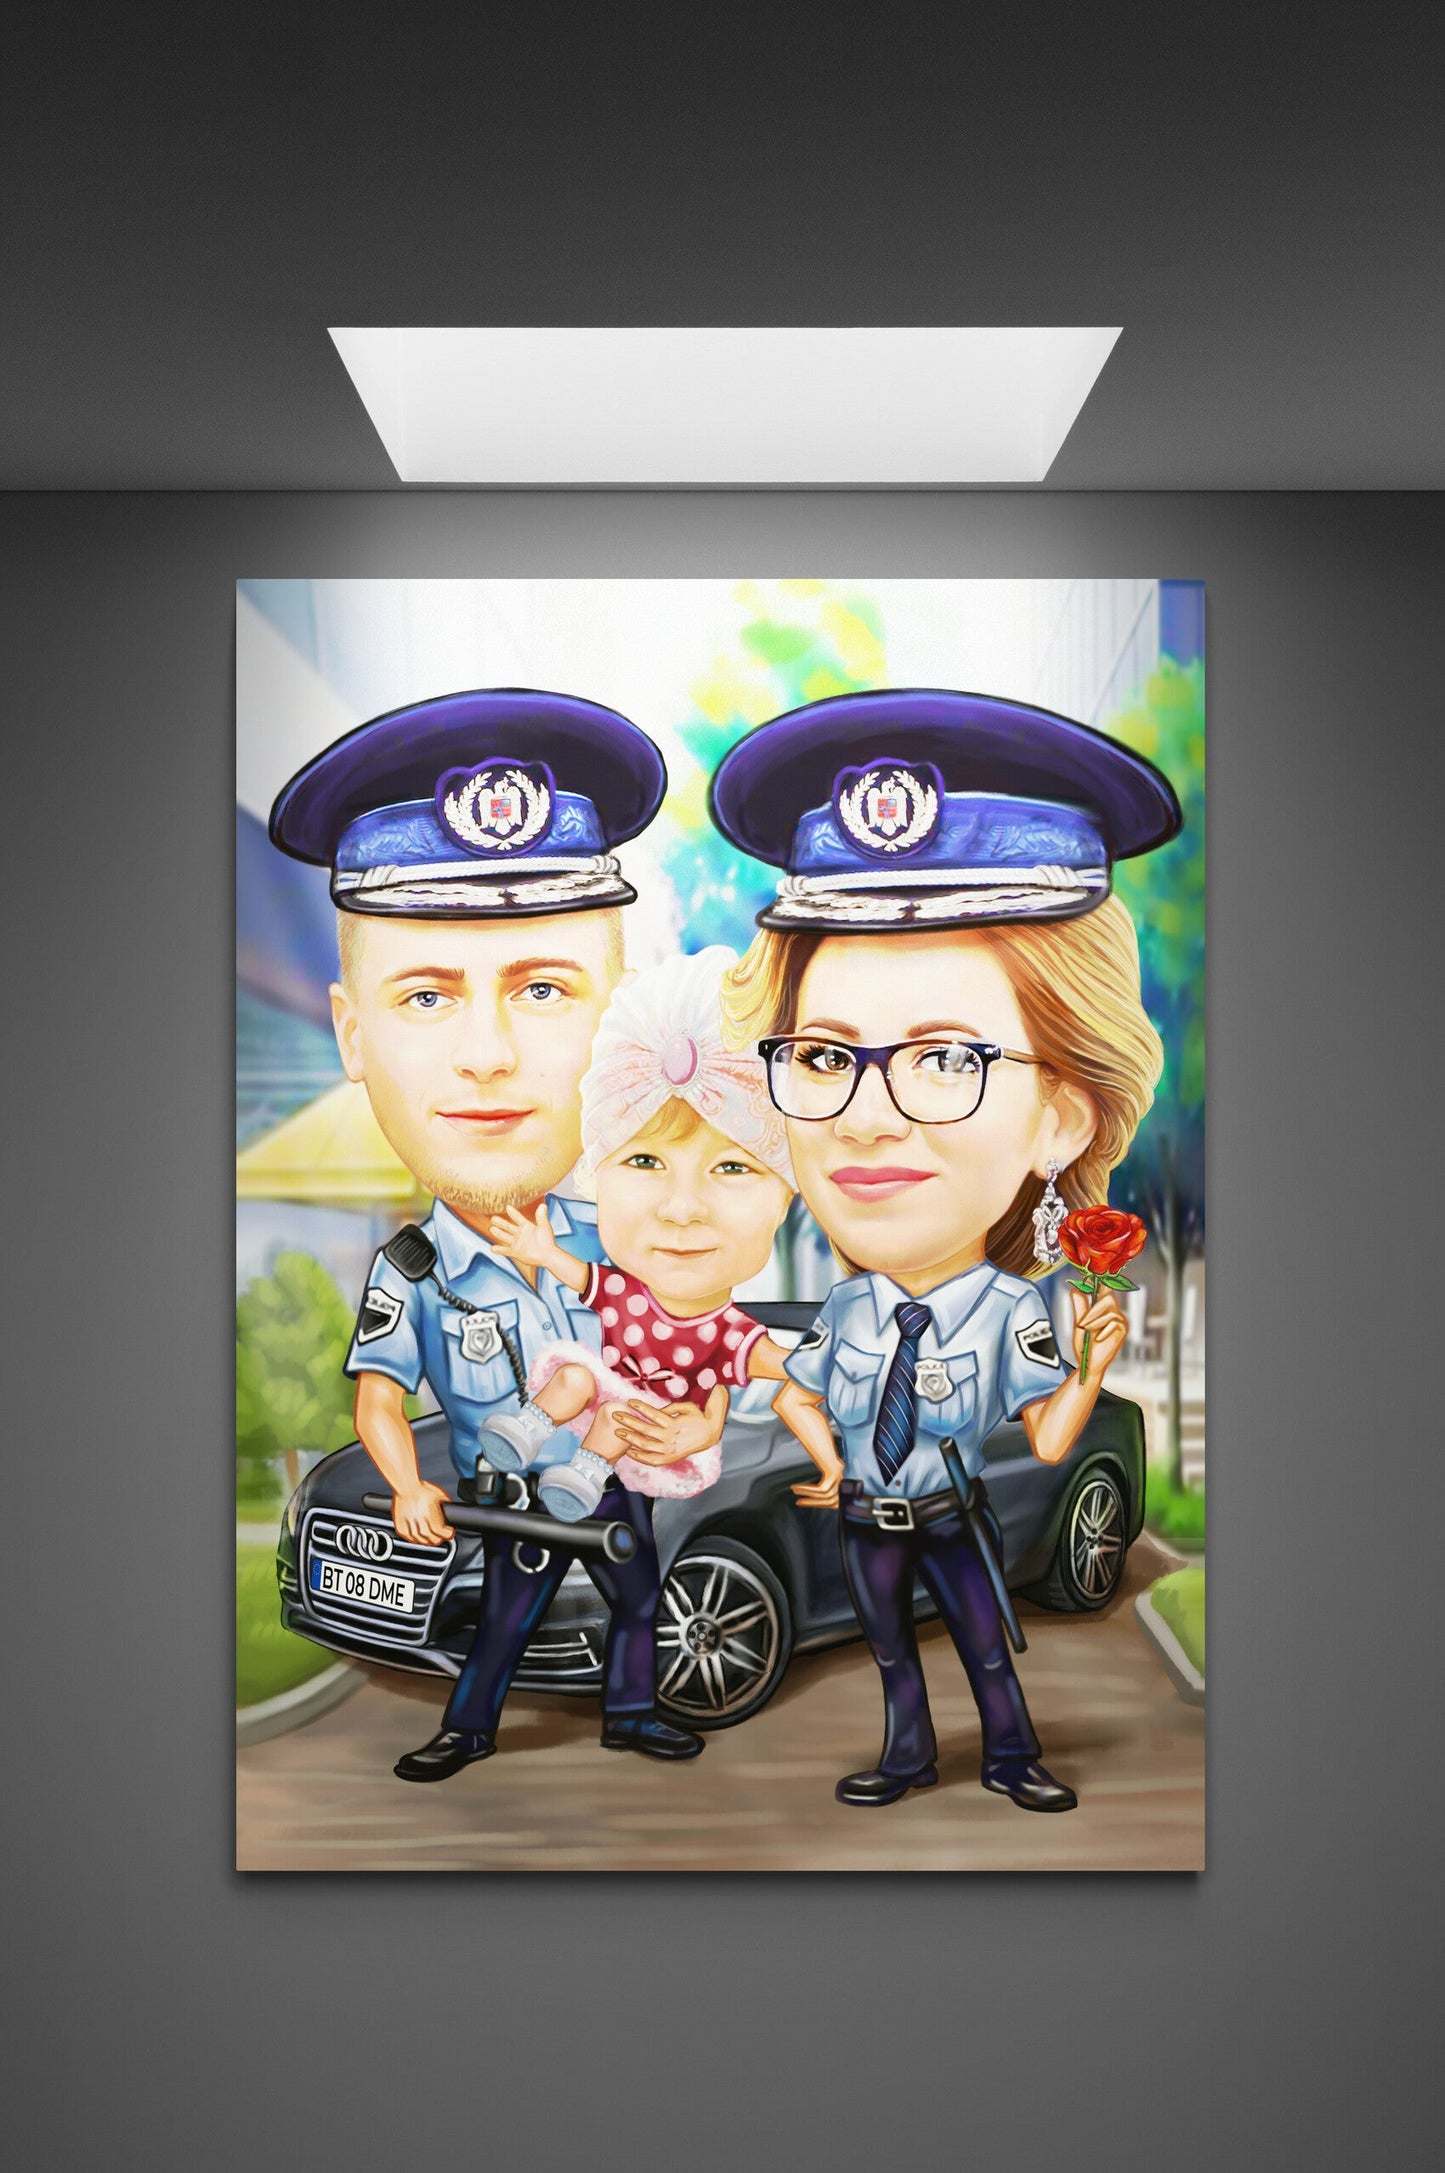 Police family with a baby caricature